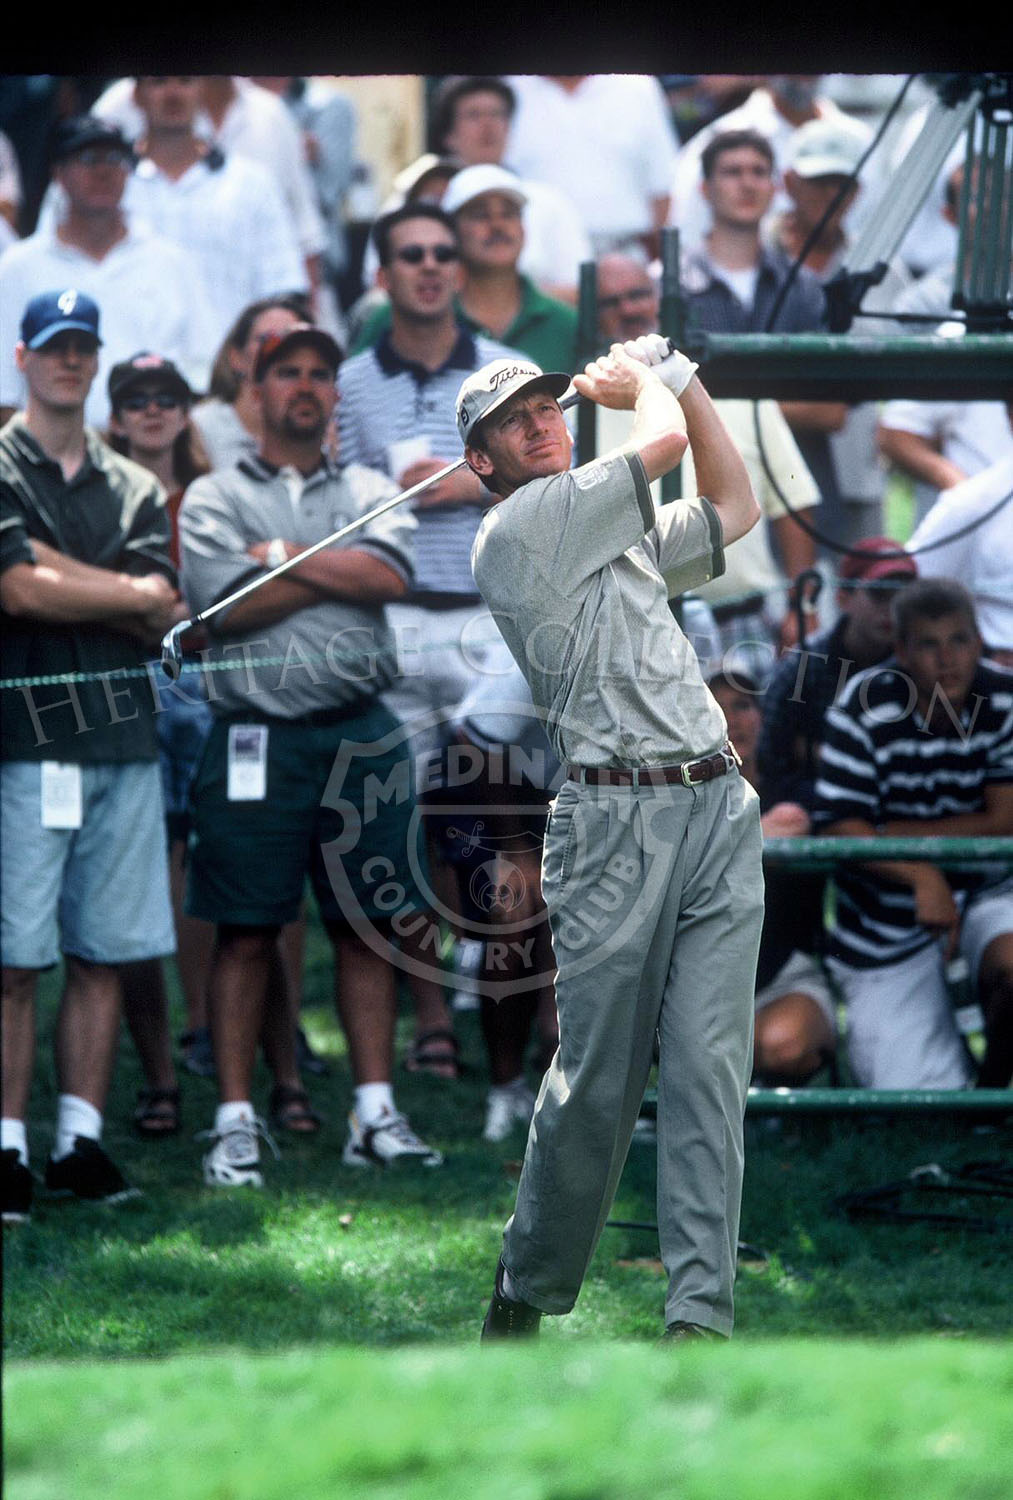 For Round 4 of the 81st PGA championship, Brad Faxon was paired with Bruce Zabriski. Although Faxon did not fare well, tying with three others at 296 for 61st-place, he did go on to win the PGA's B.C. Open less than one month later.